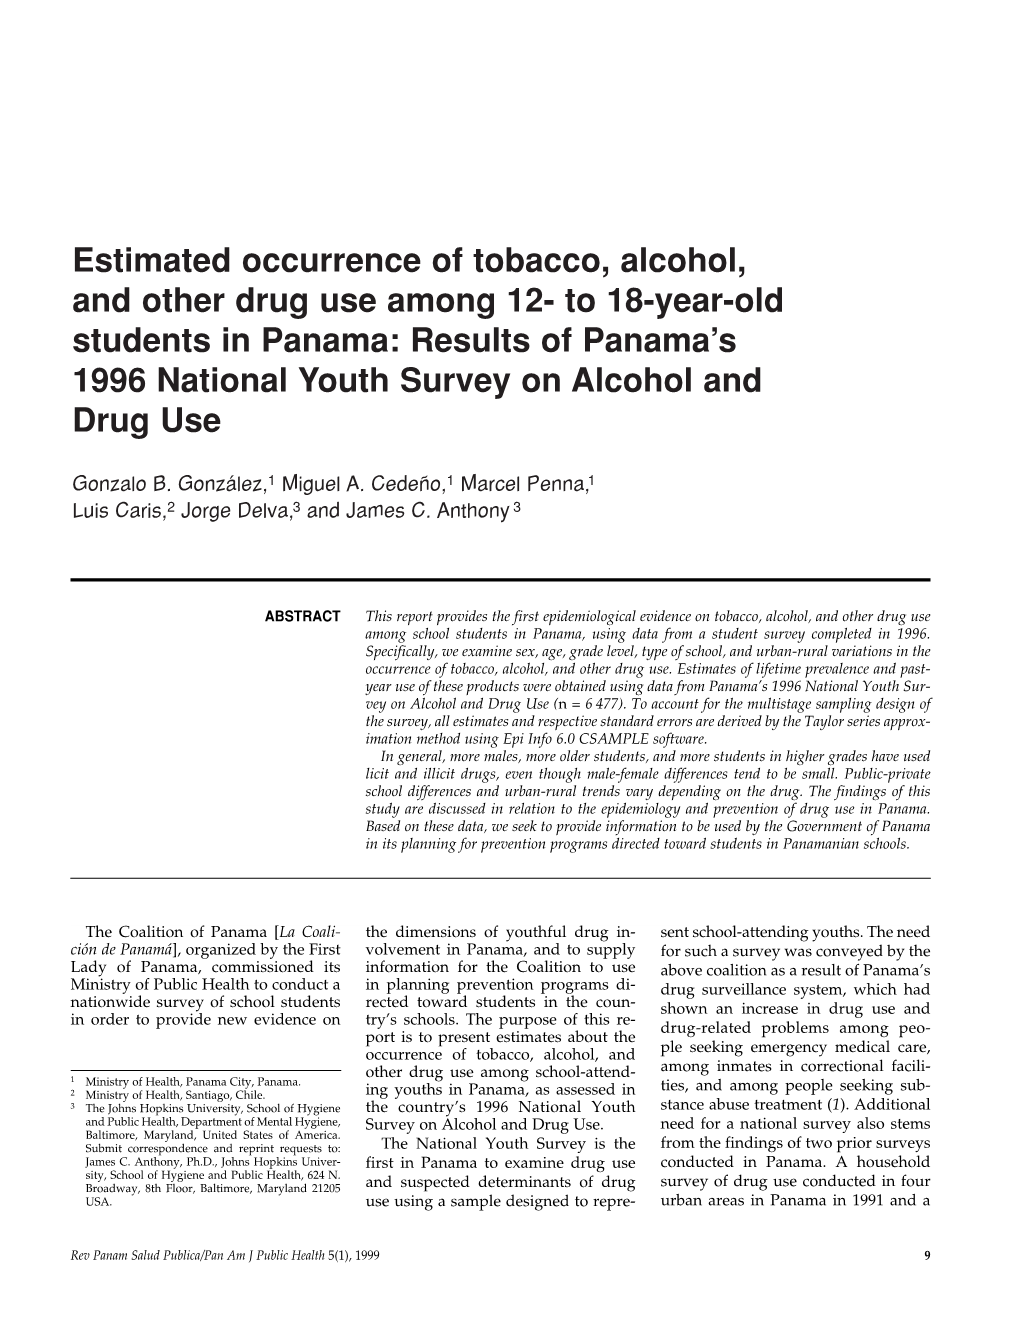 Estimated Occurrence of Tobacco, Alcohol, and Other Drug Use Among 12